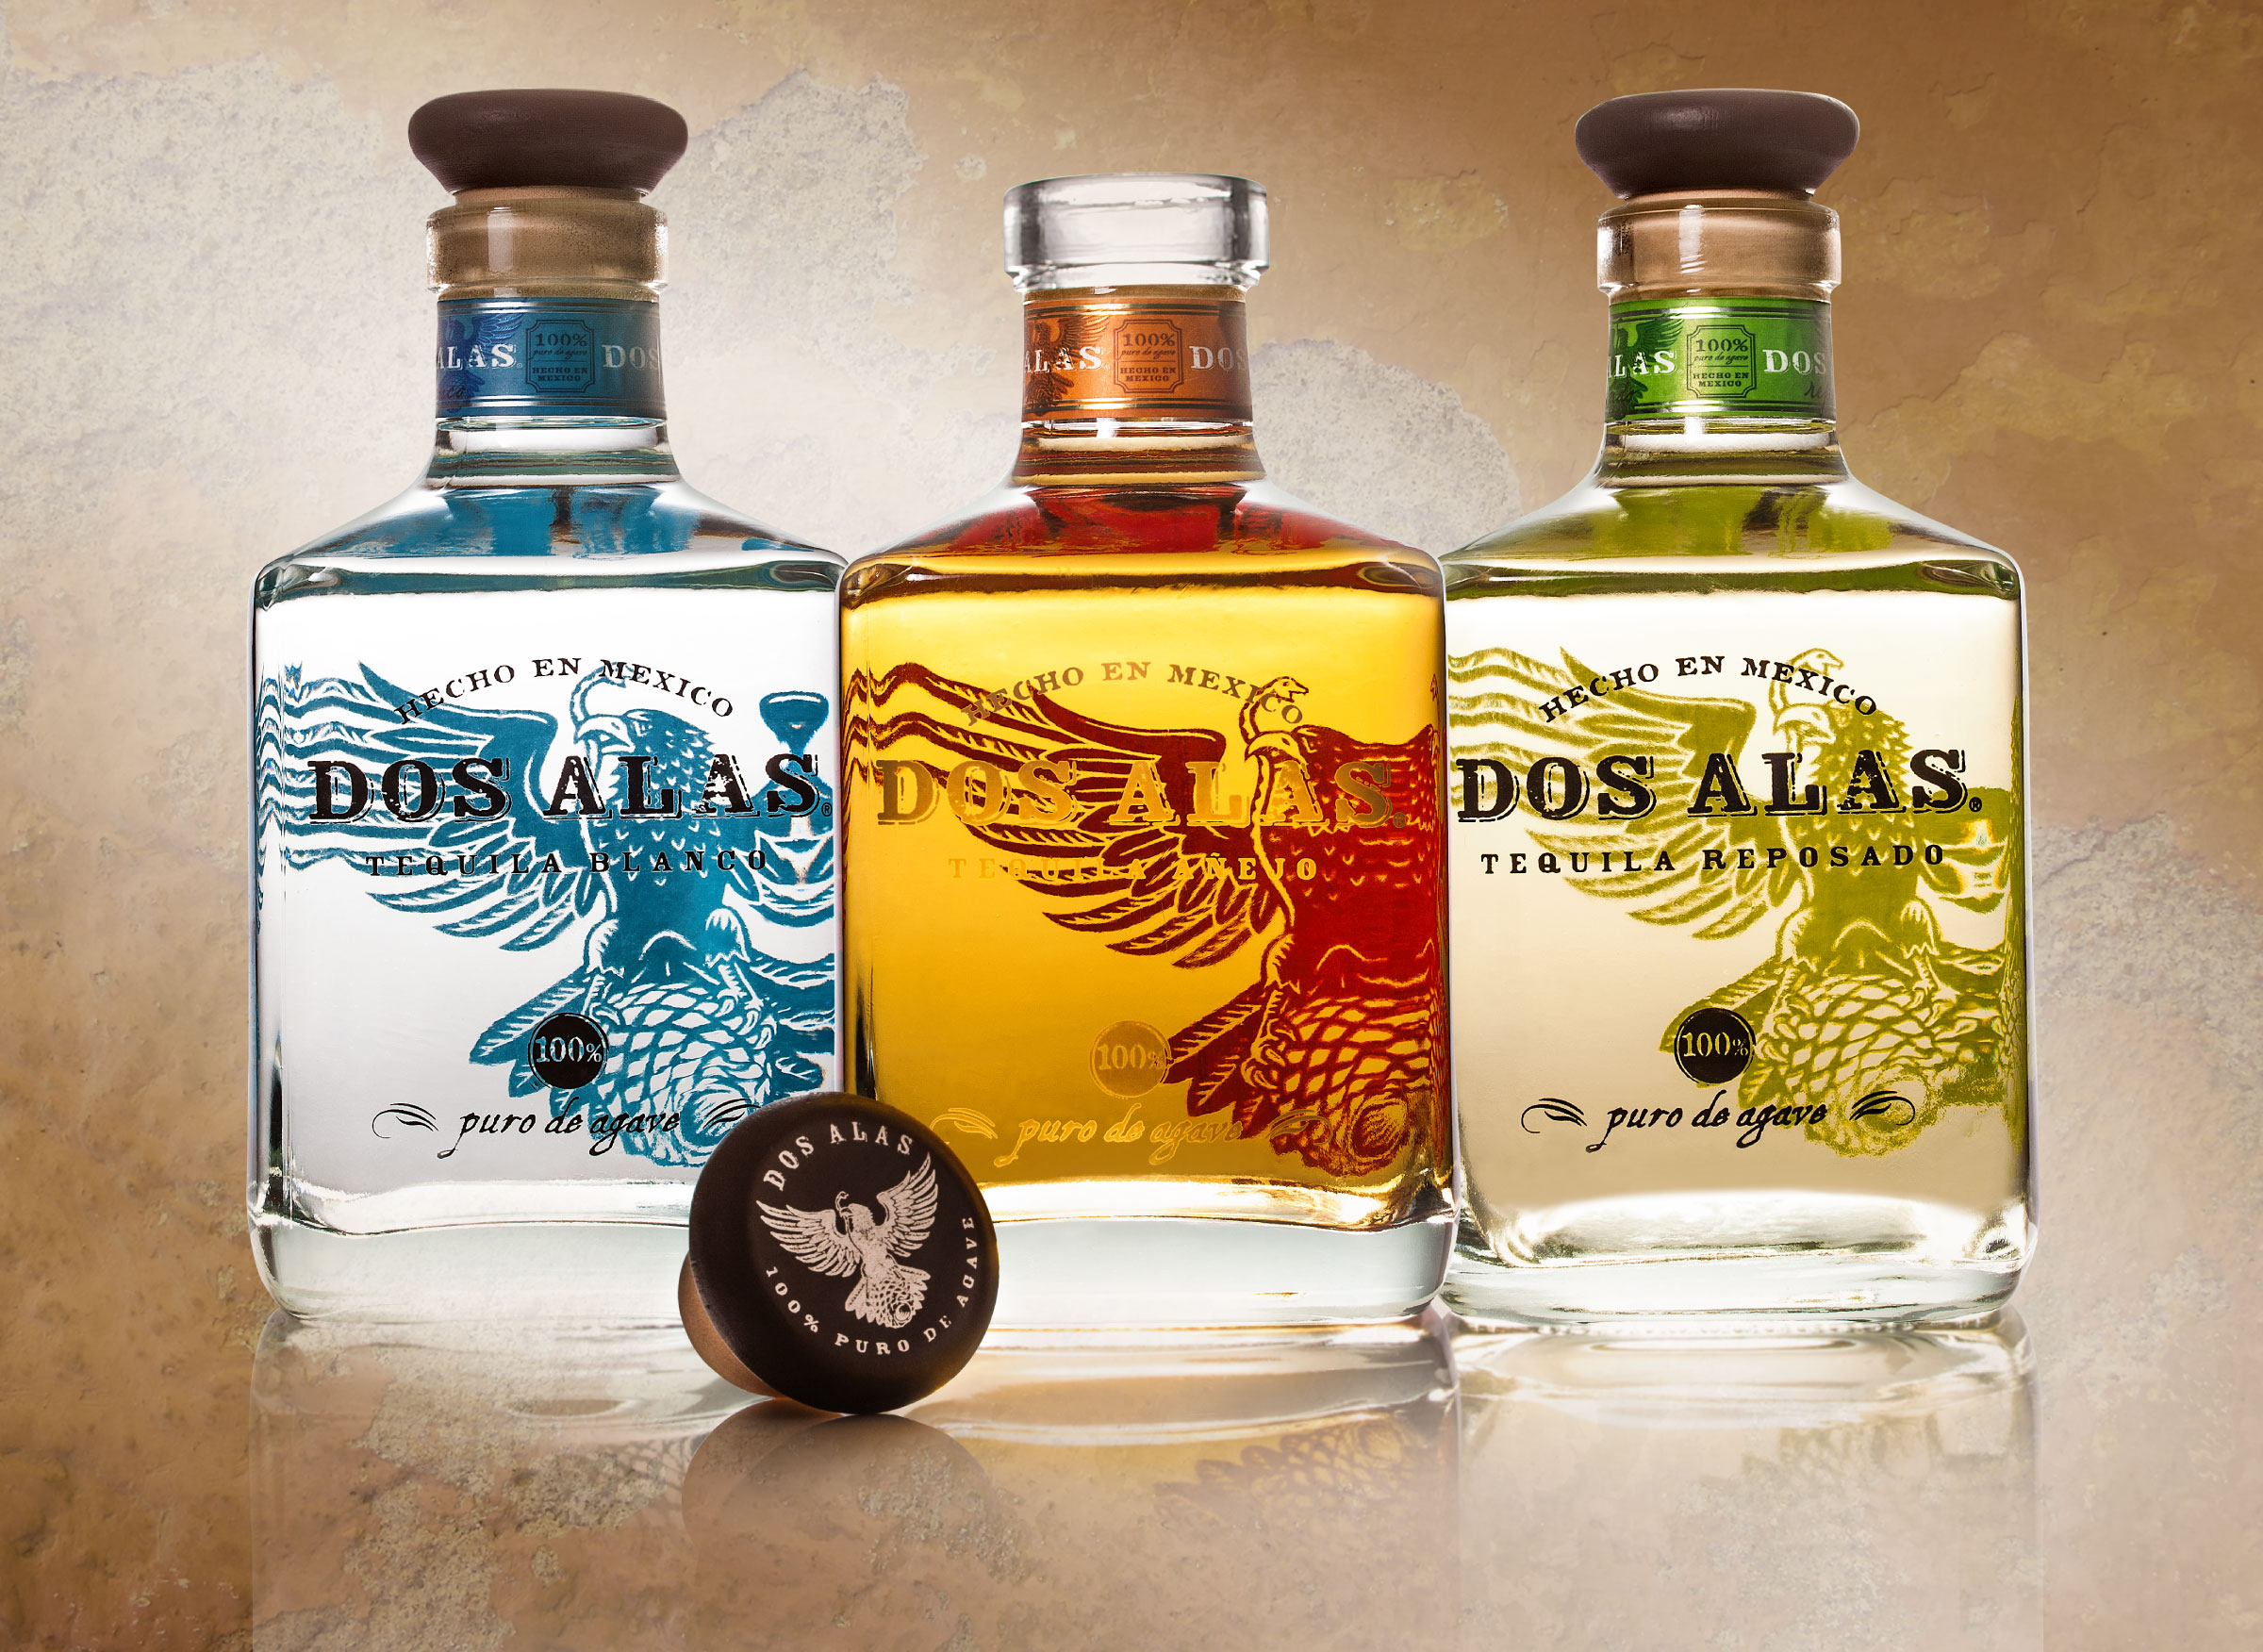 Dos Alas Tequila — McLean: Brand & Packaging Design